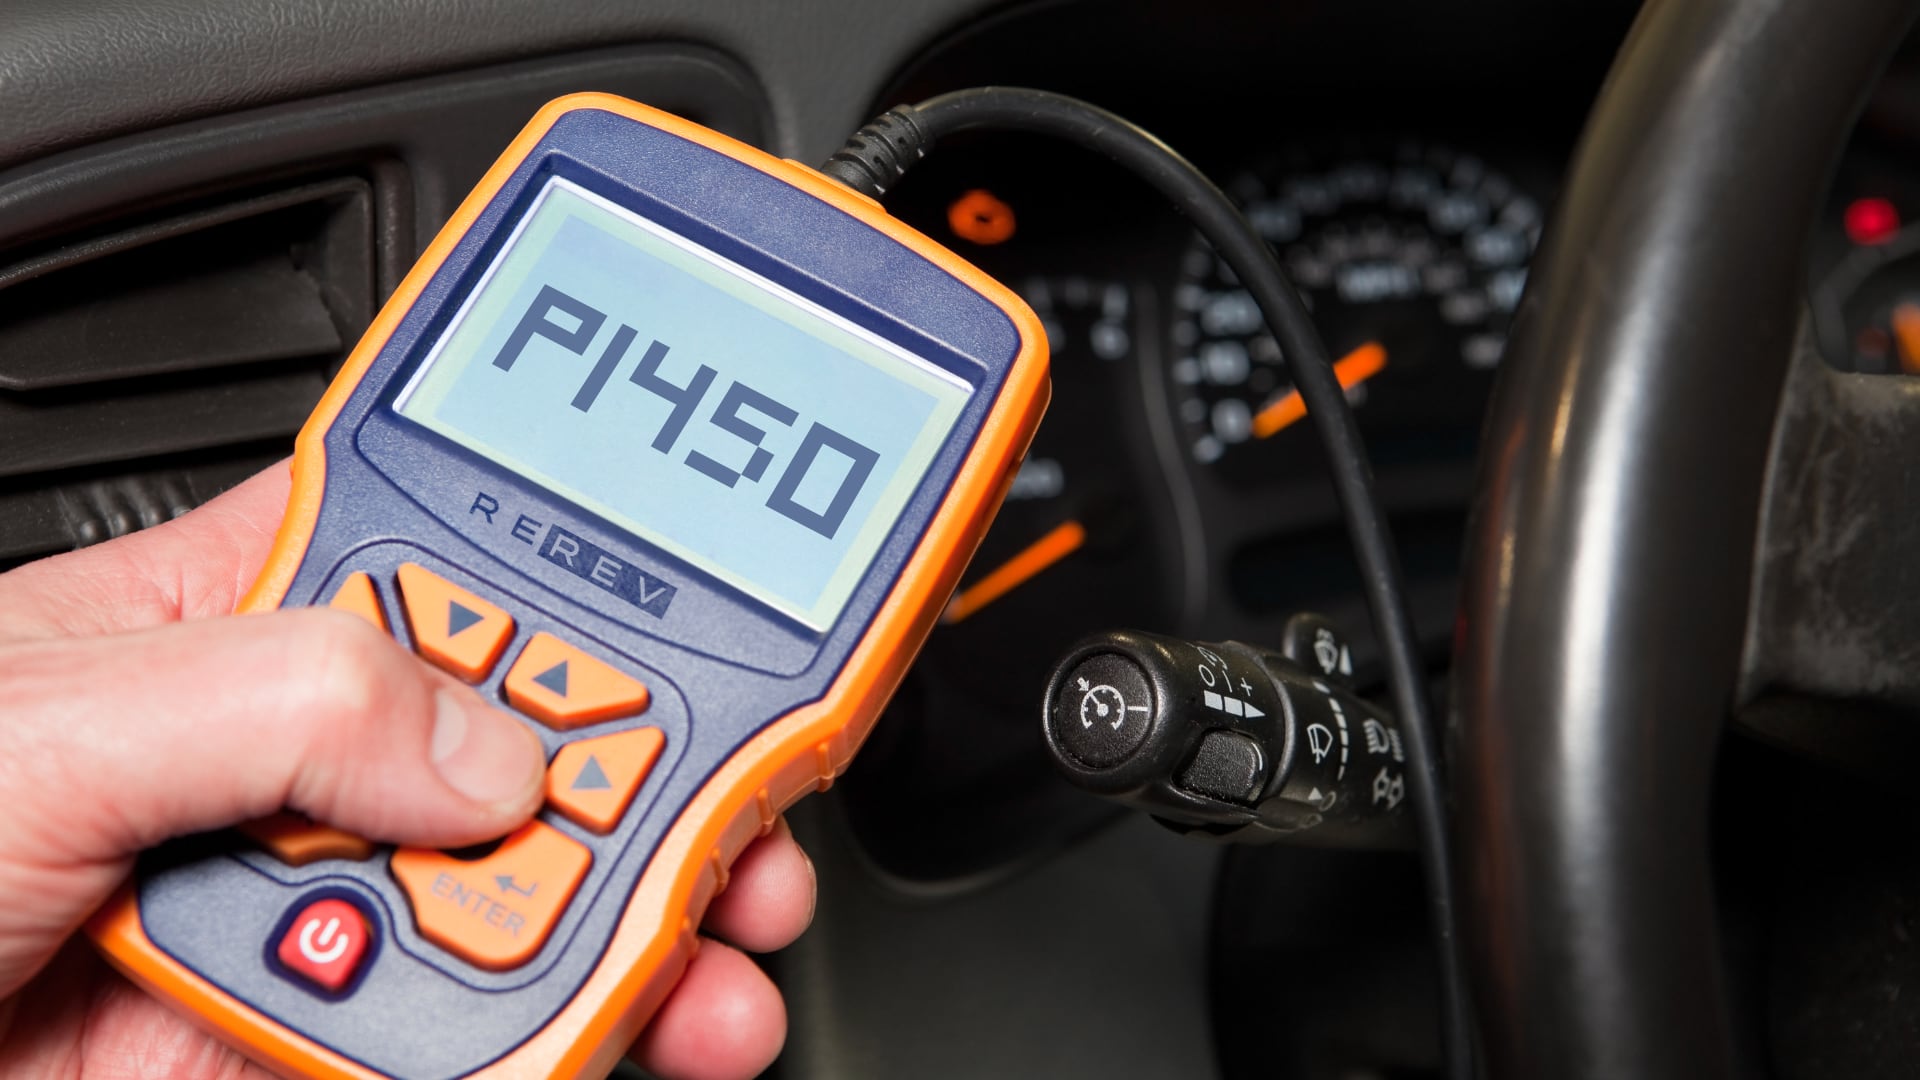 A person holding a py50 odometer in a car.